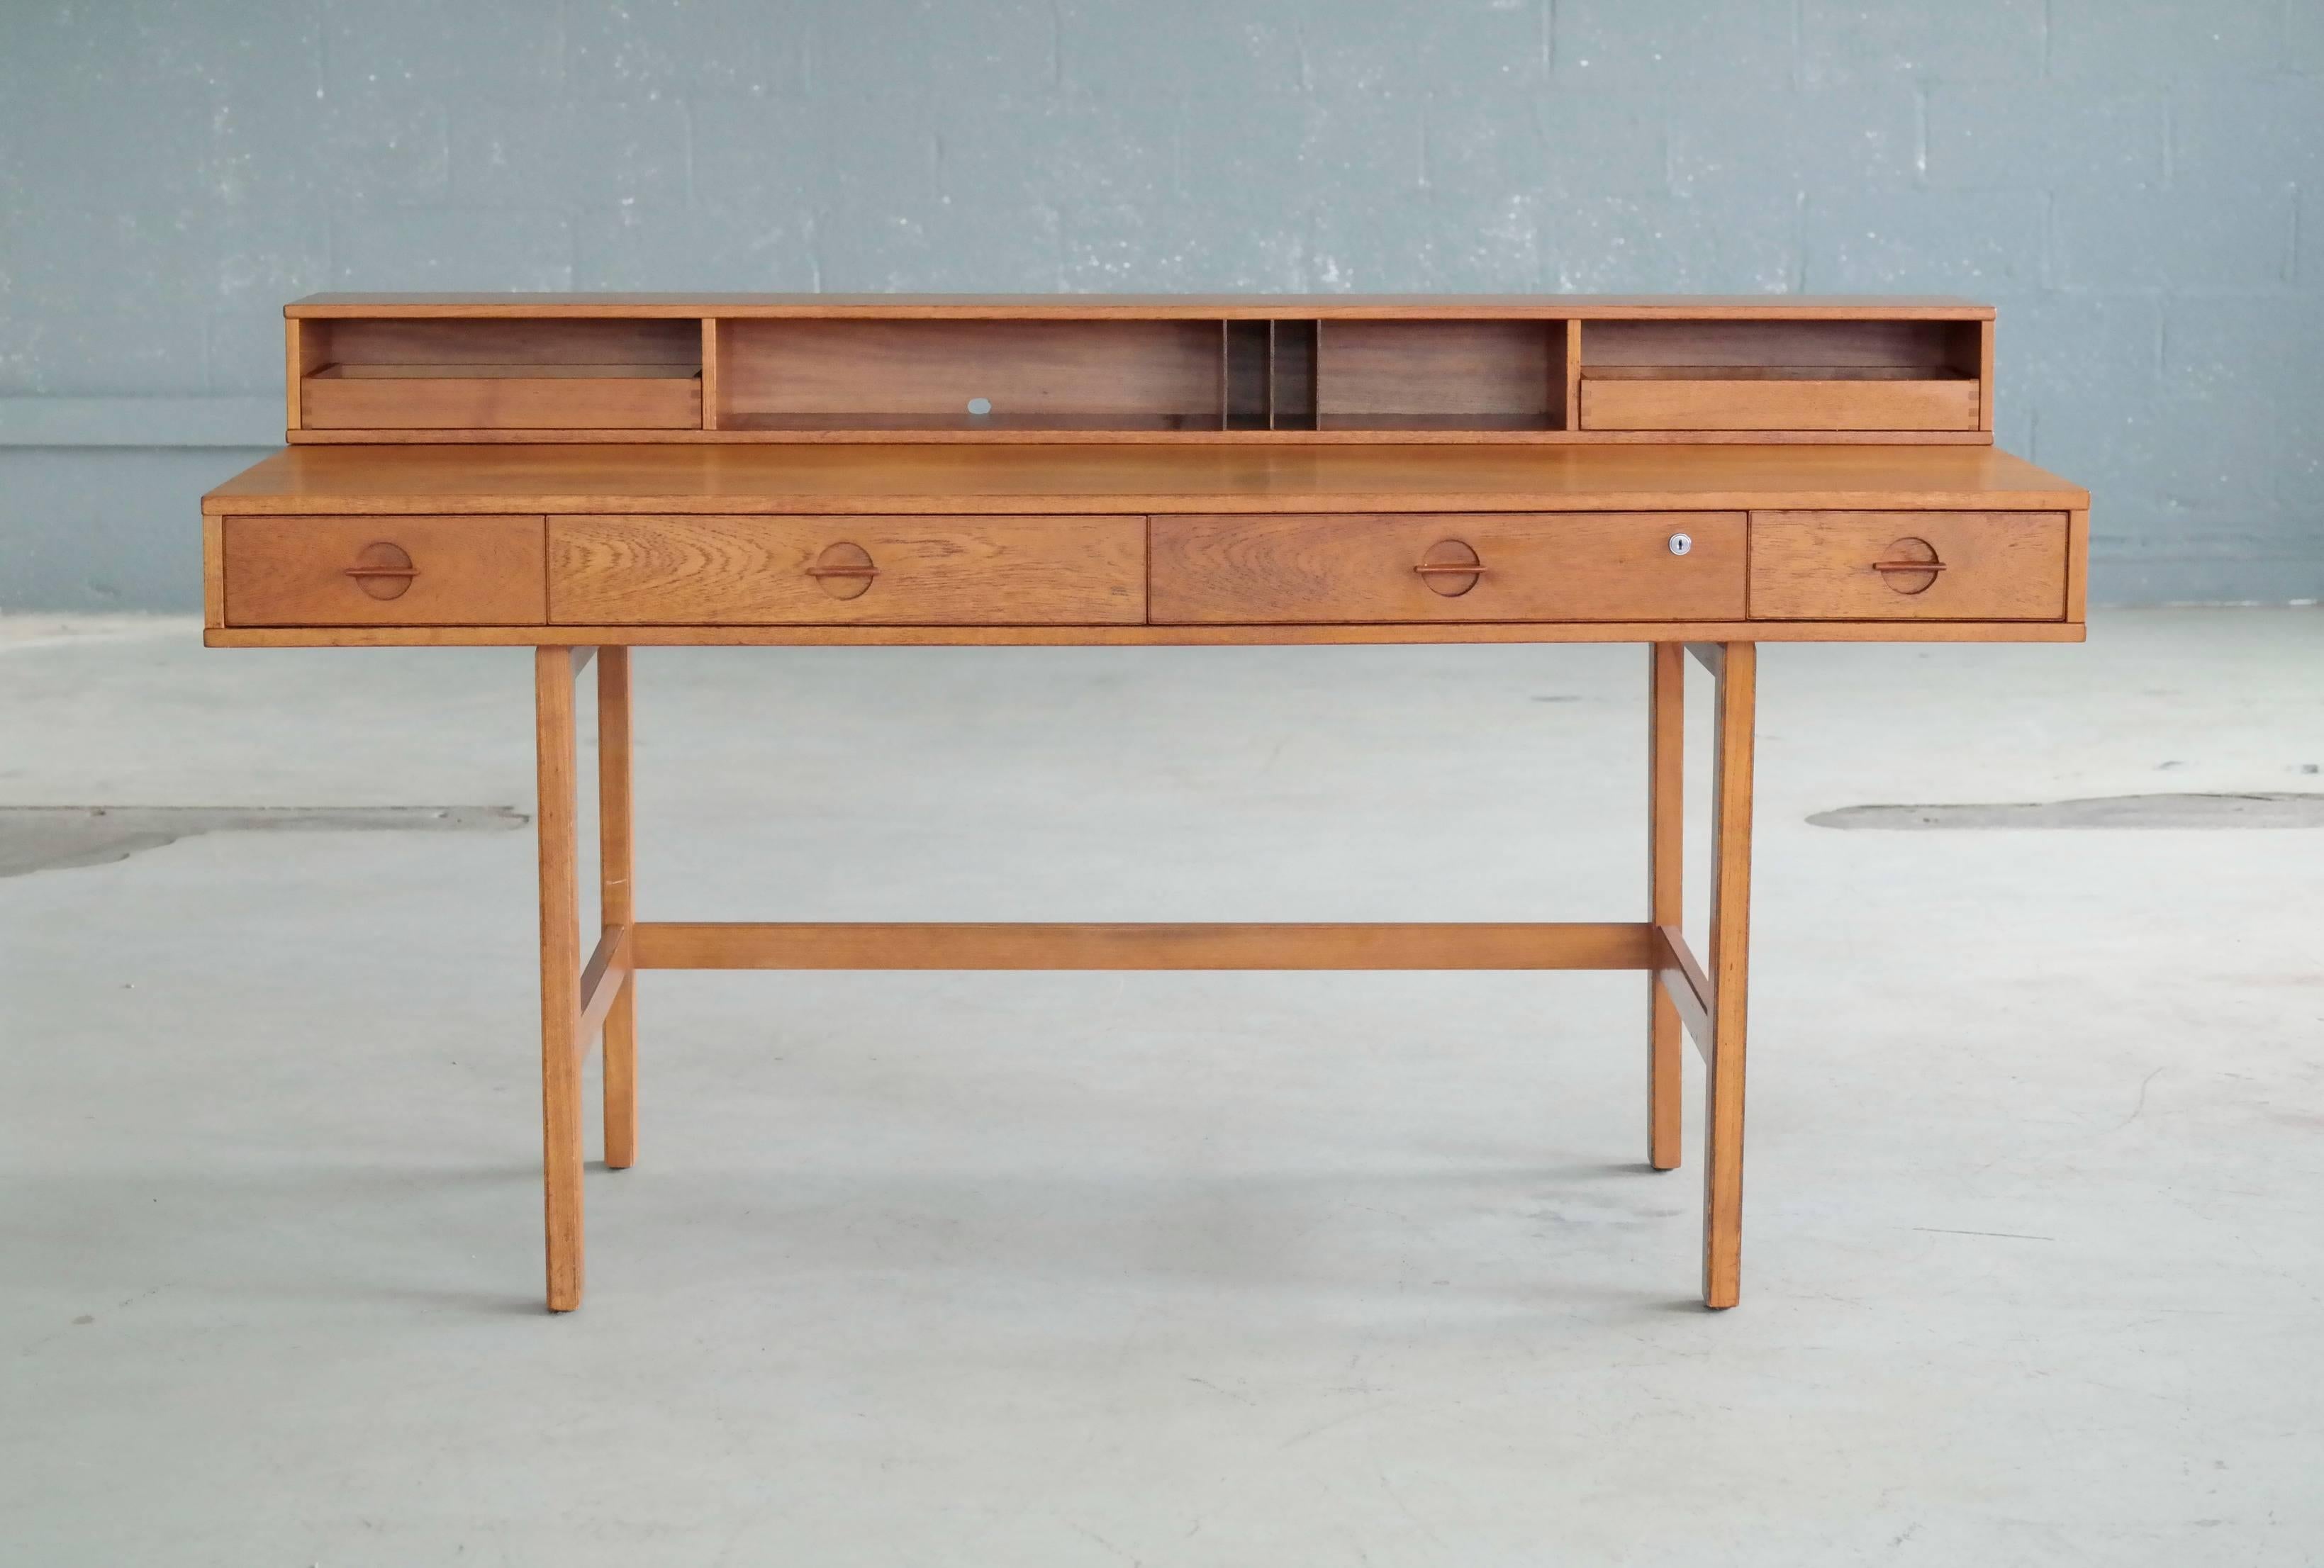 Beautiful 1960s teak desk by Peter Lovig Nielsen and Jens Quistgaard made of solid teak wood and teak veneer with a beautiful wood grain and nice light color, finished with solid brass hinges. The sleek, angular and functional design is very